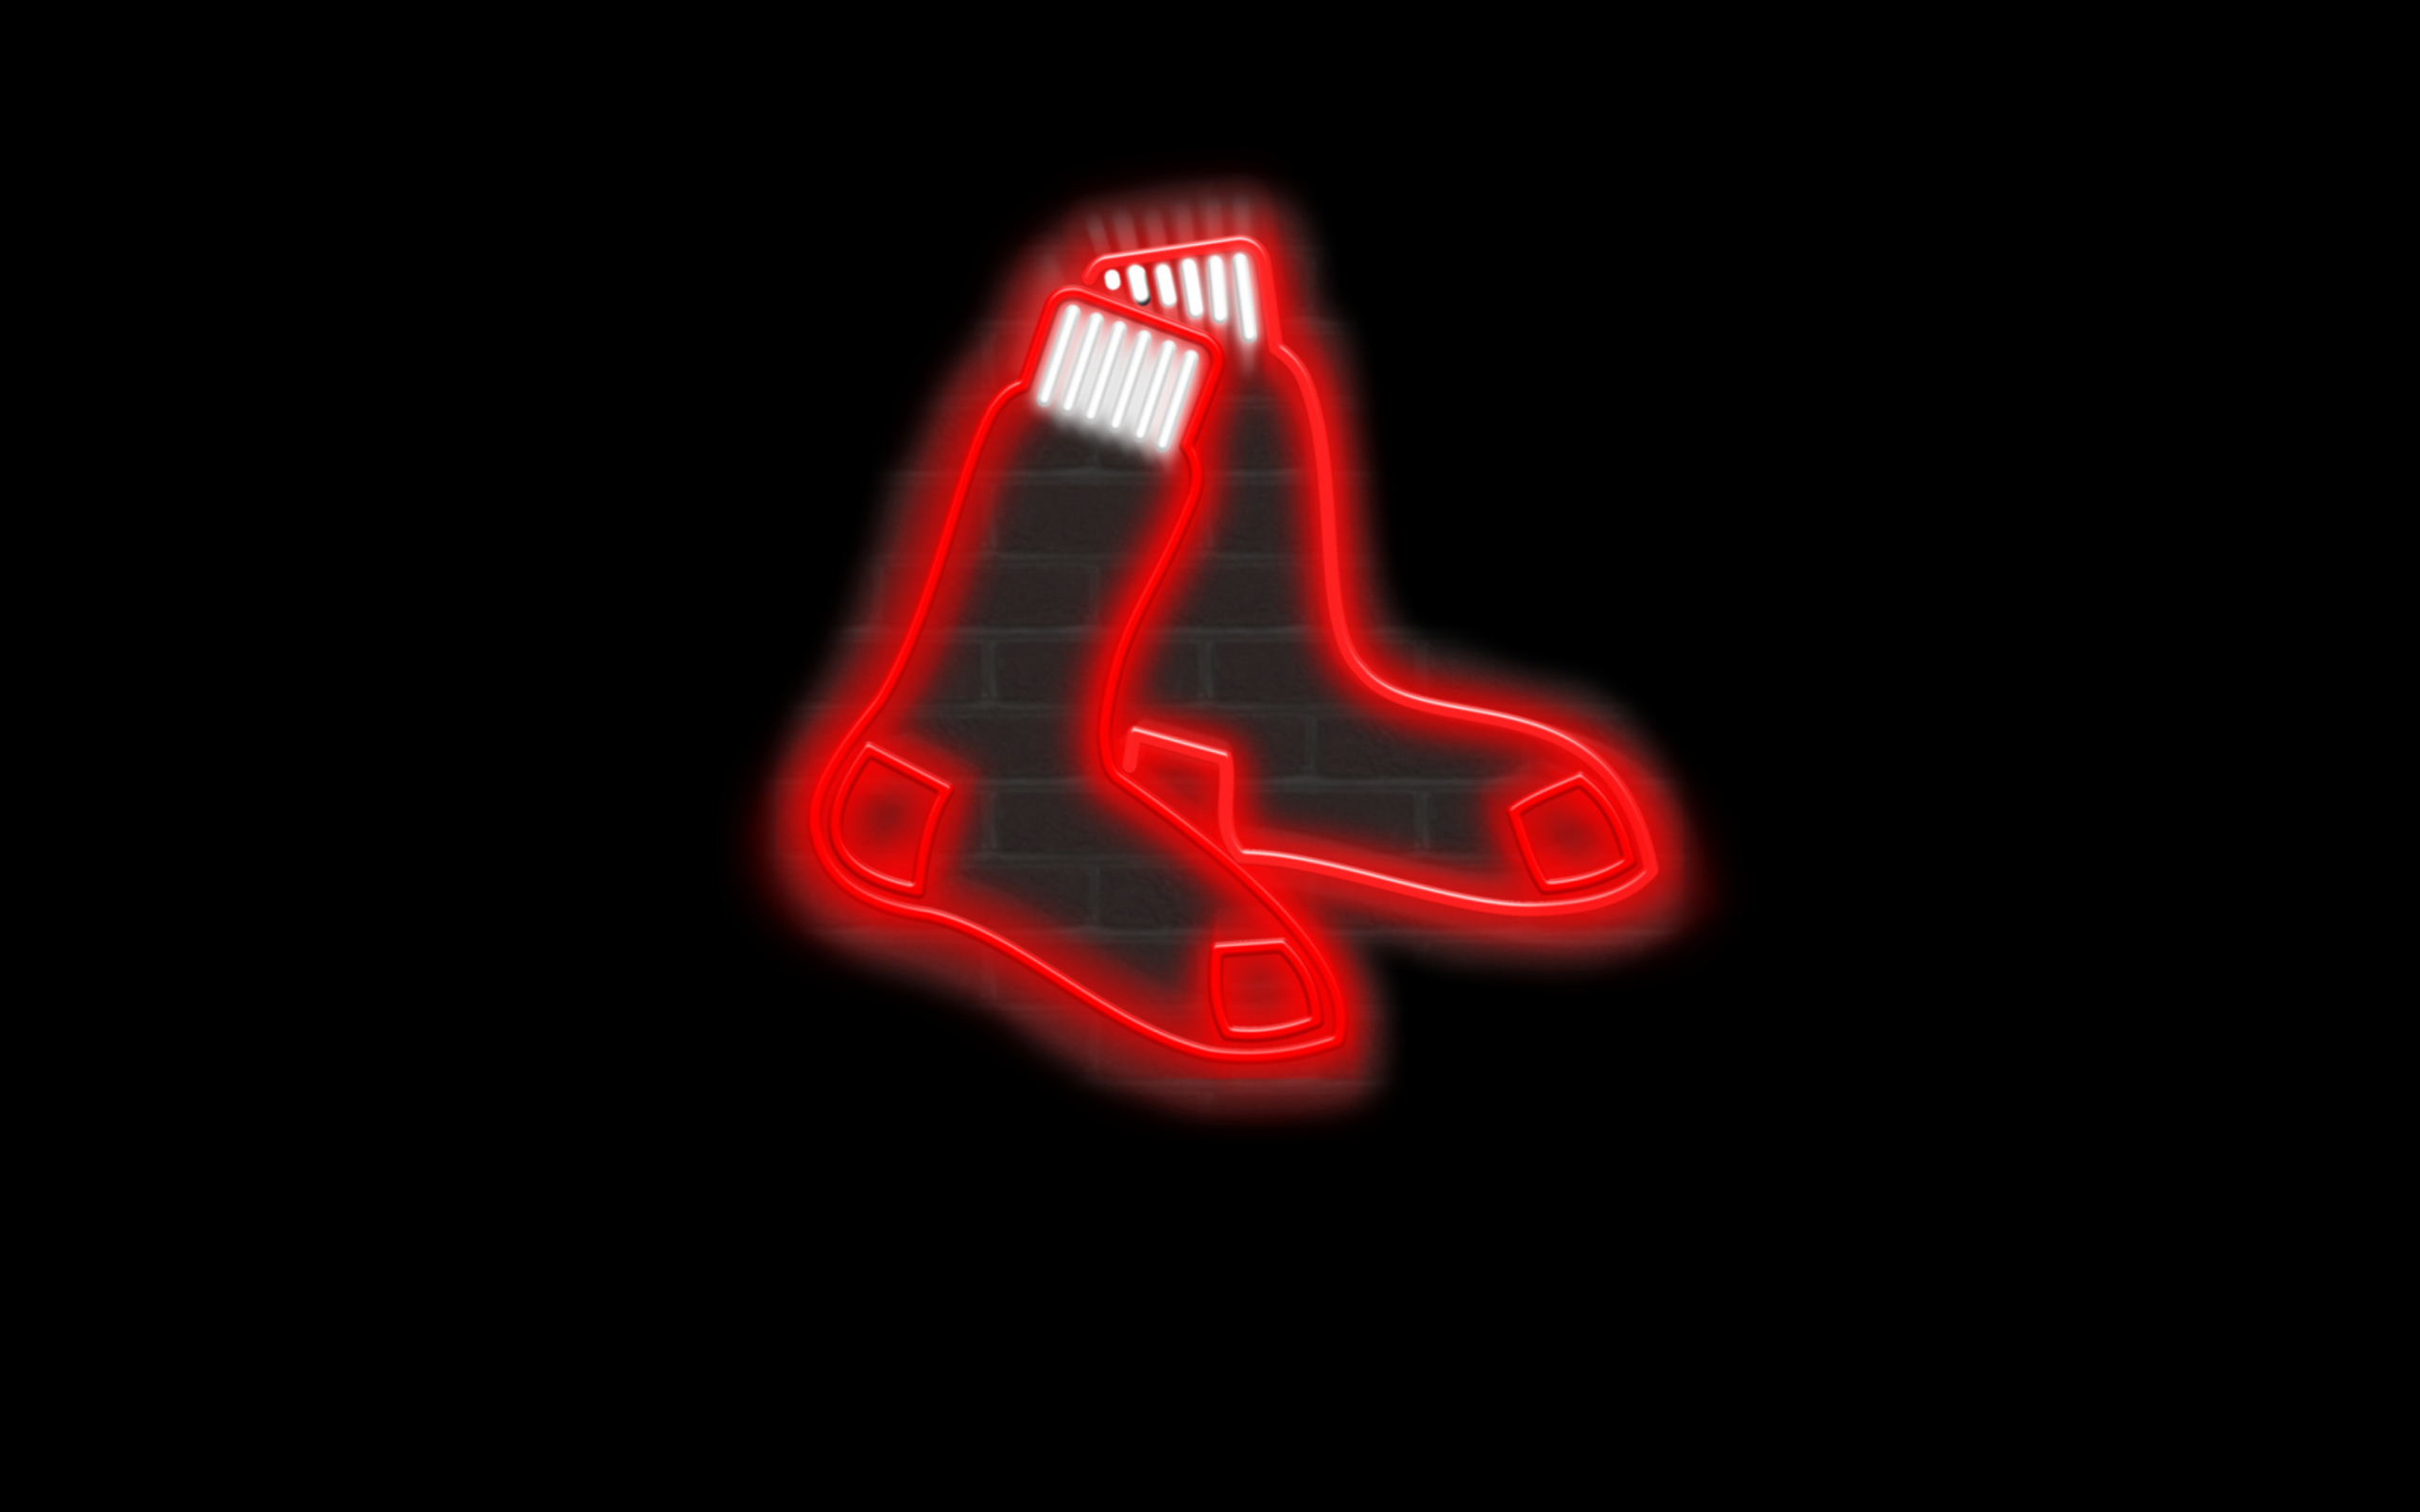 5818208 / 2560x1600 boston red sox wallpapers for desktop.